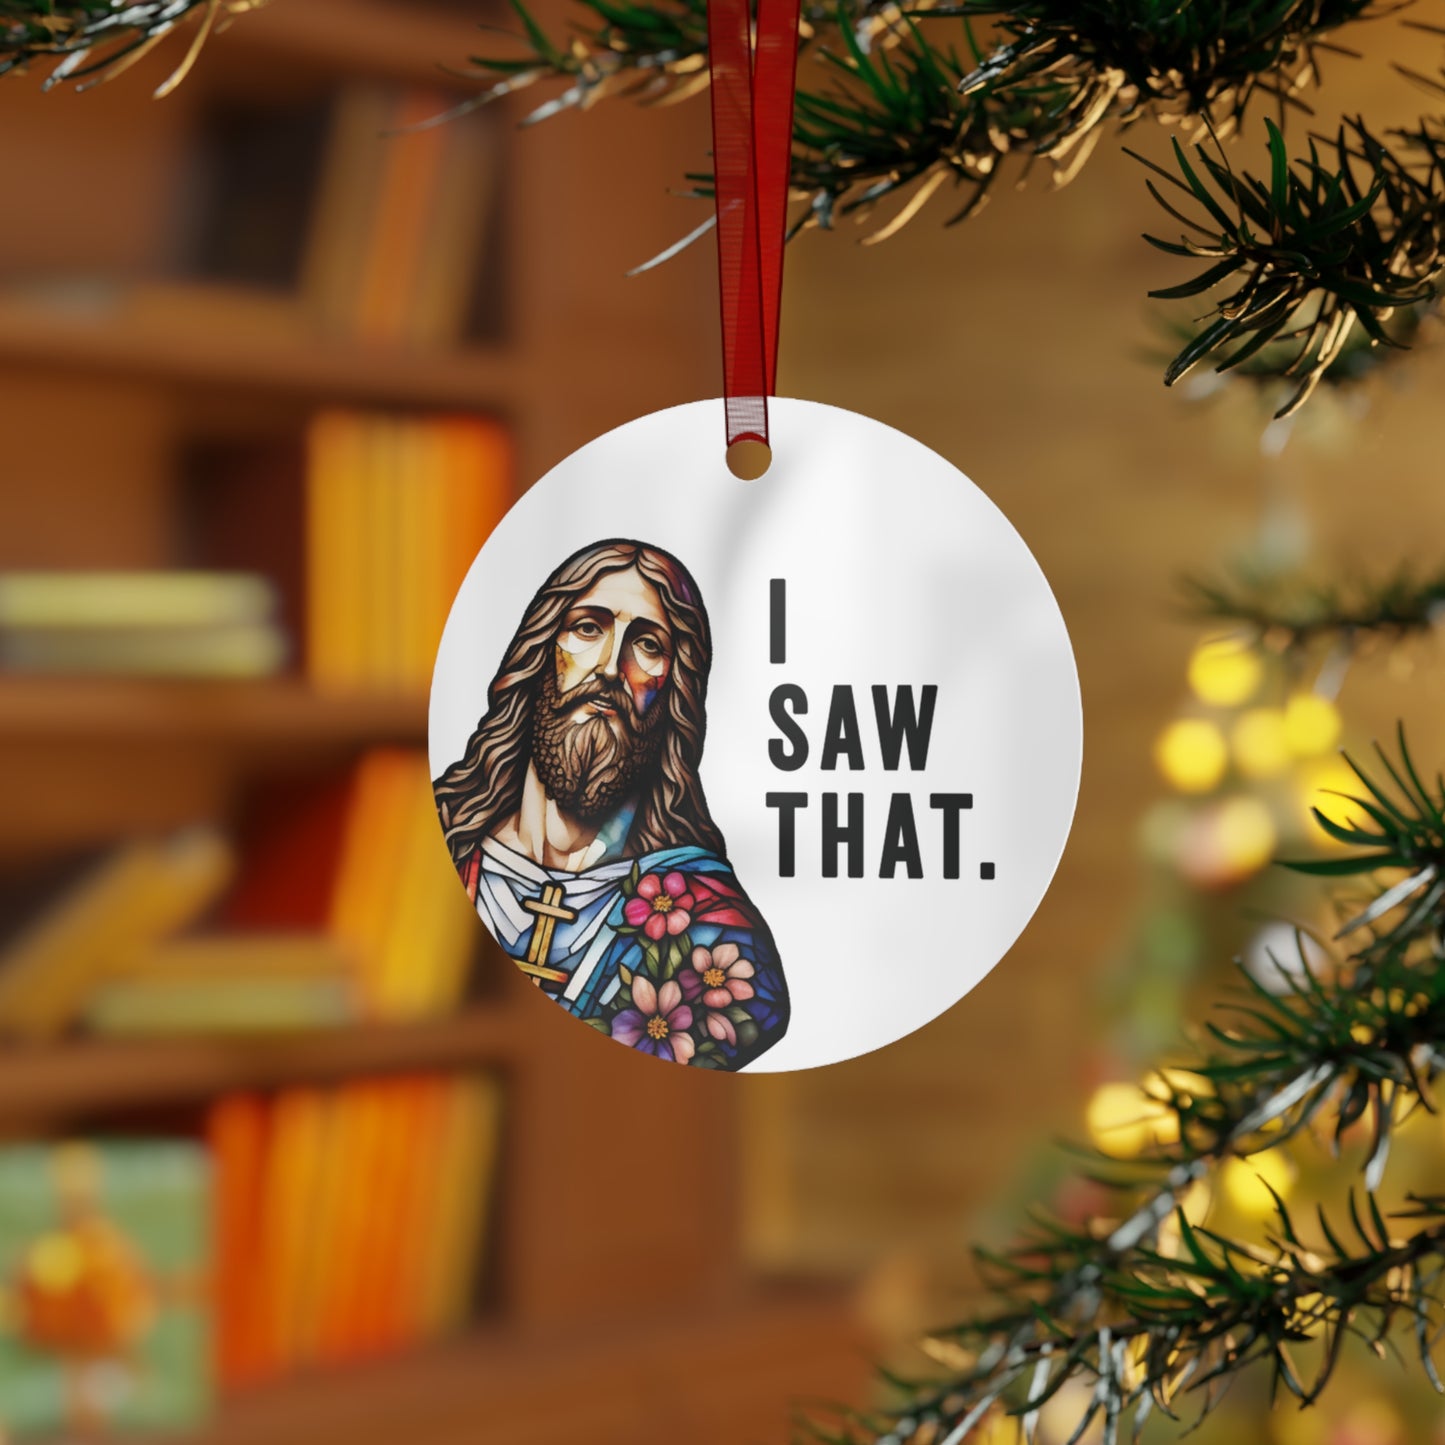 Funny Jesus Ornament I Saw That Stained Glass Style Ornament Lightweight Shaterproof Metal Ornaments Christmas Ornament Exchange Christmas